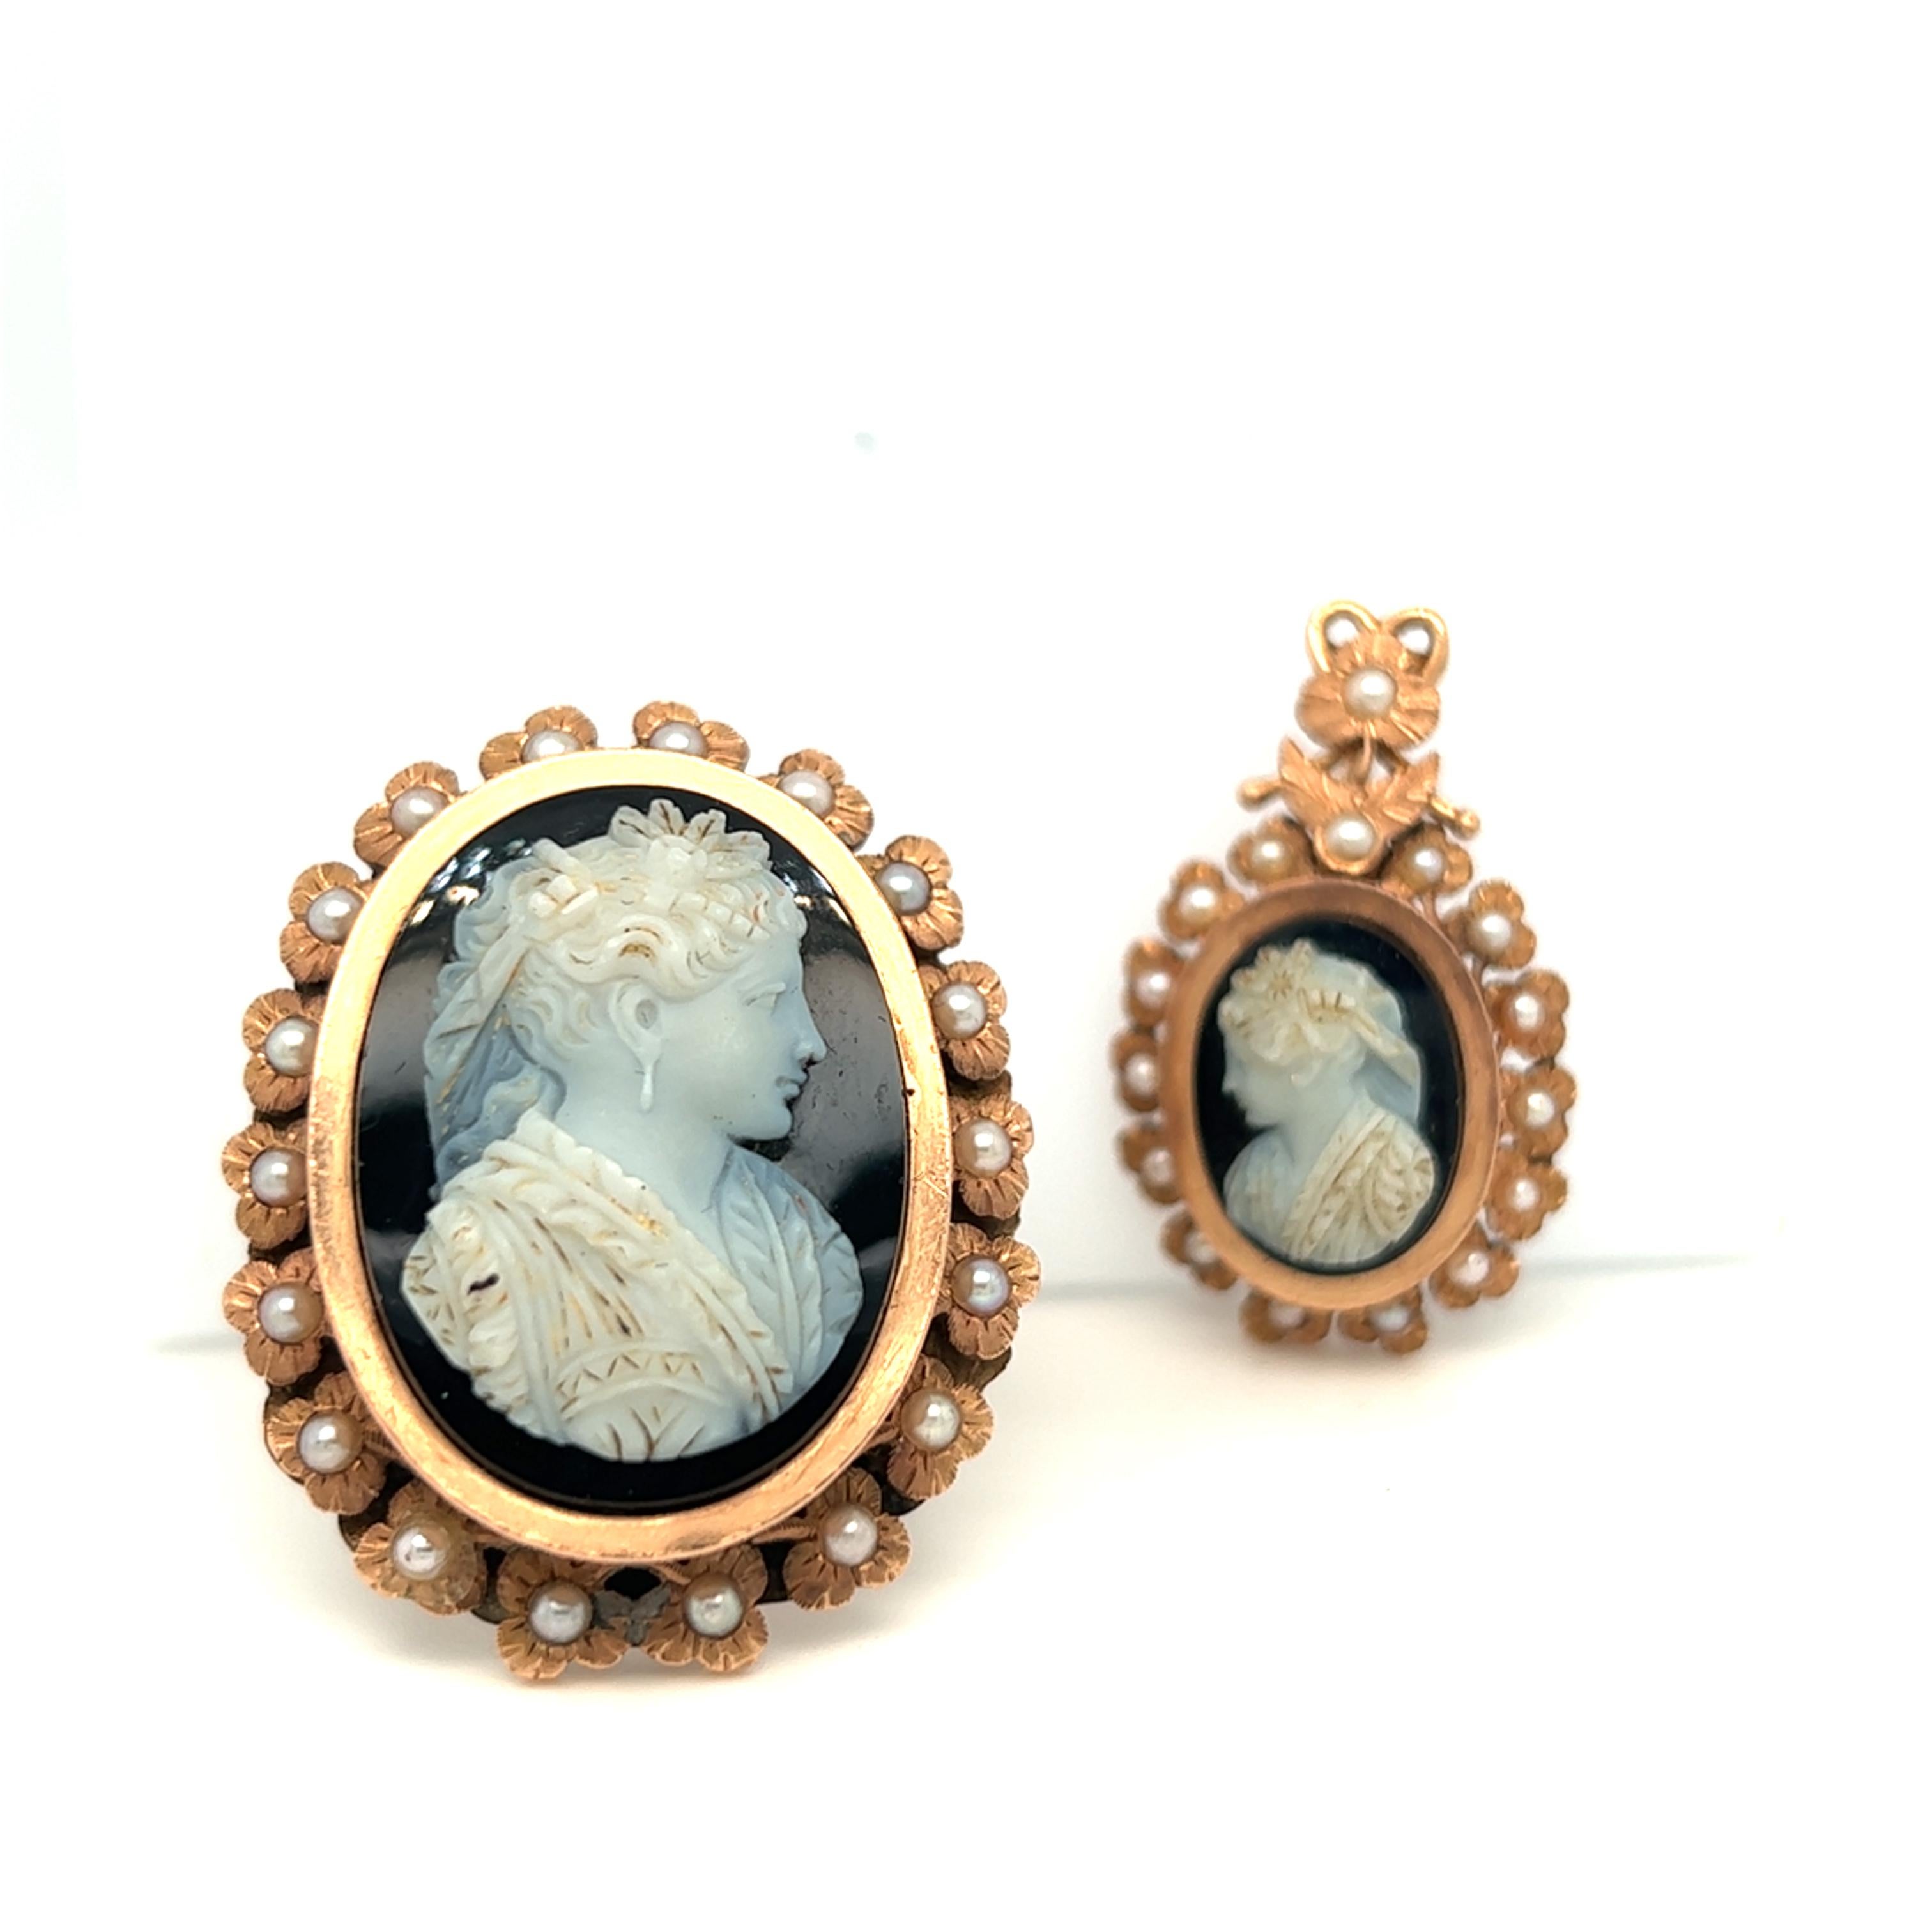 Napoleon III Antique 19th Century Natural Pearl Onyx Cameo Ring and Pendant Set For Sale